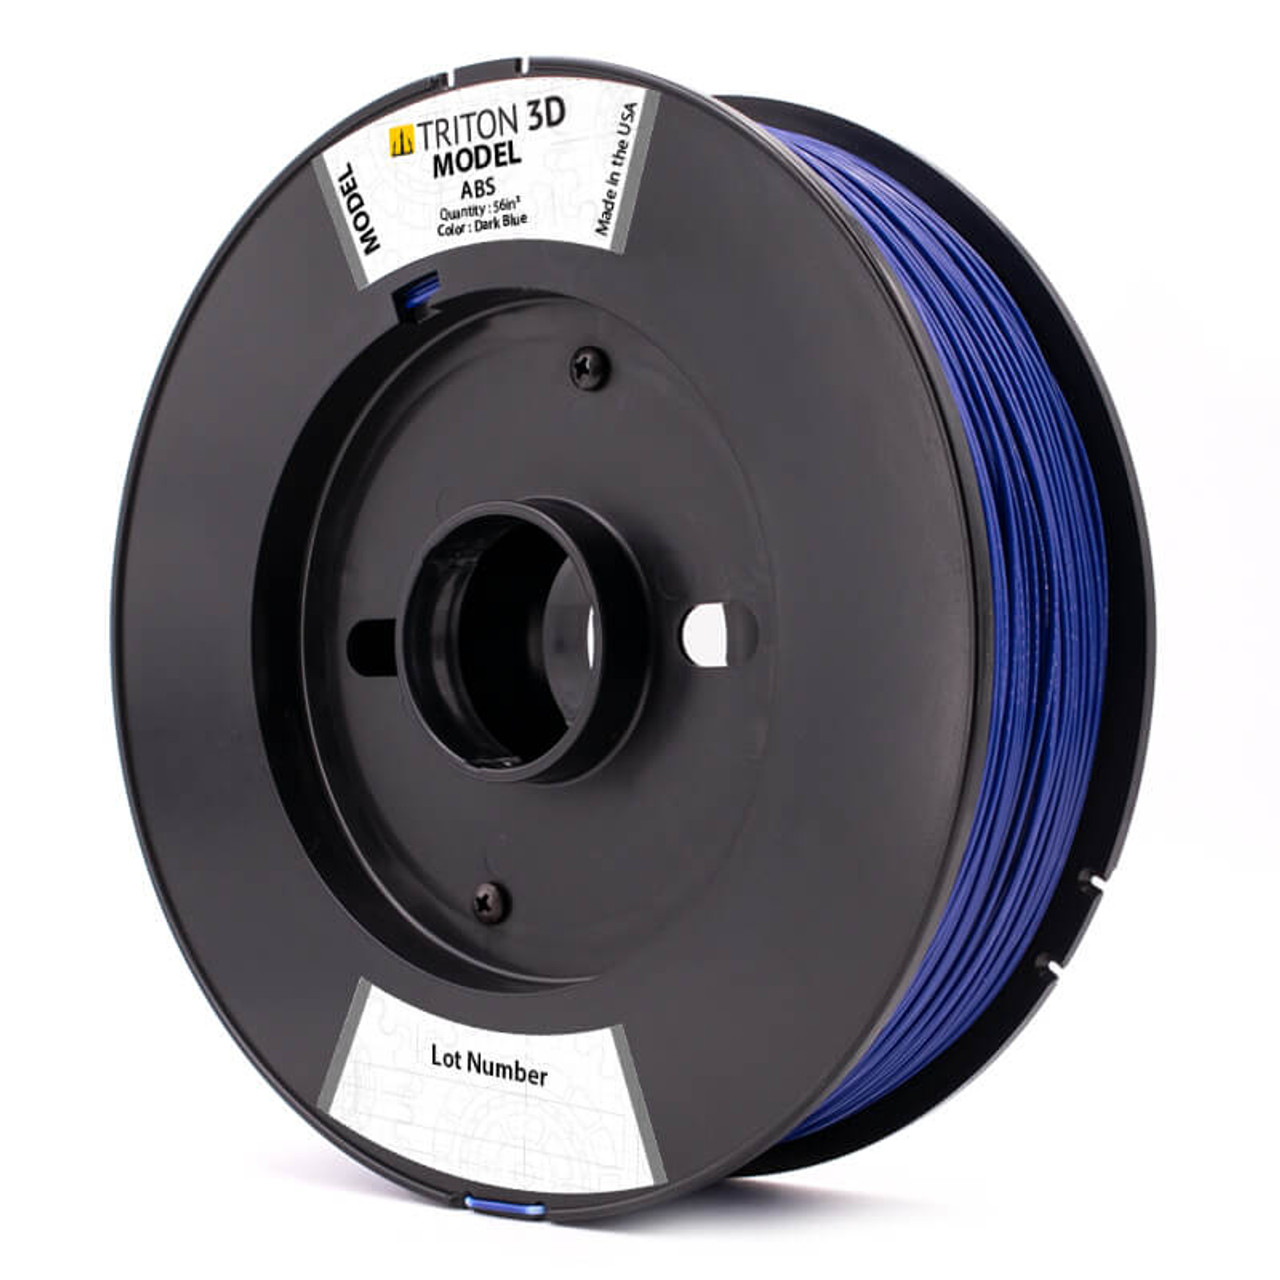 Triton™ ABS (P400 and P430 type) Filament is 100% compatible with